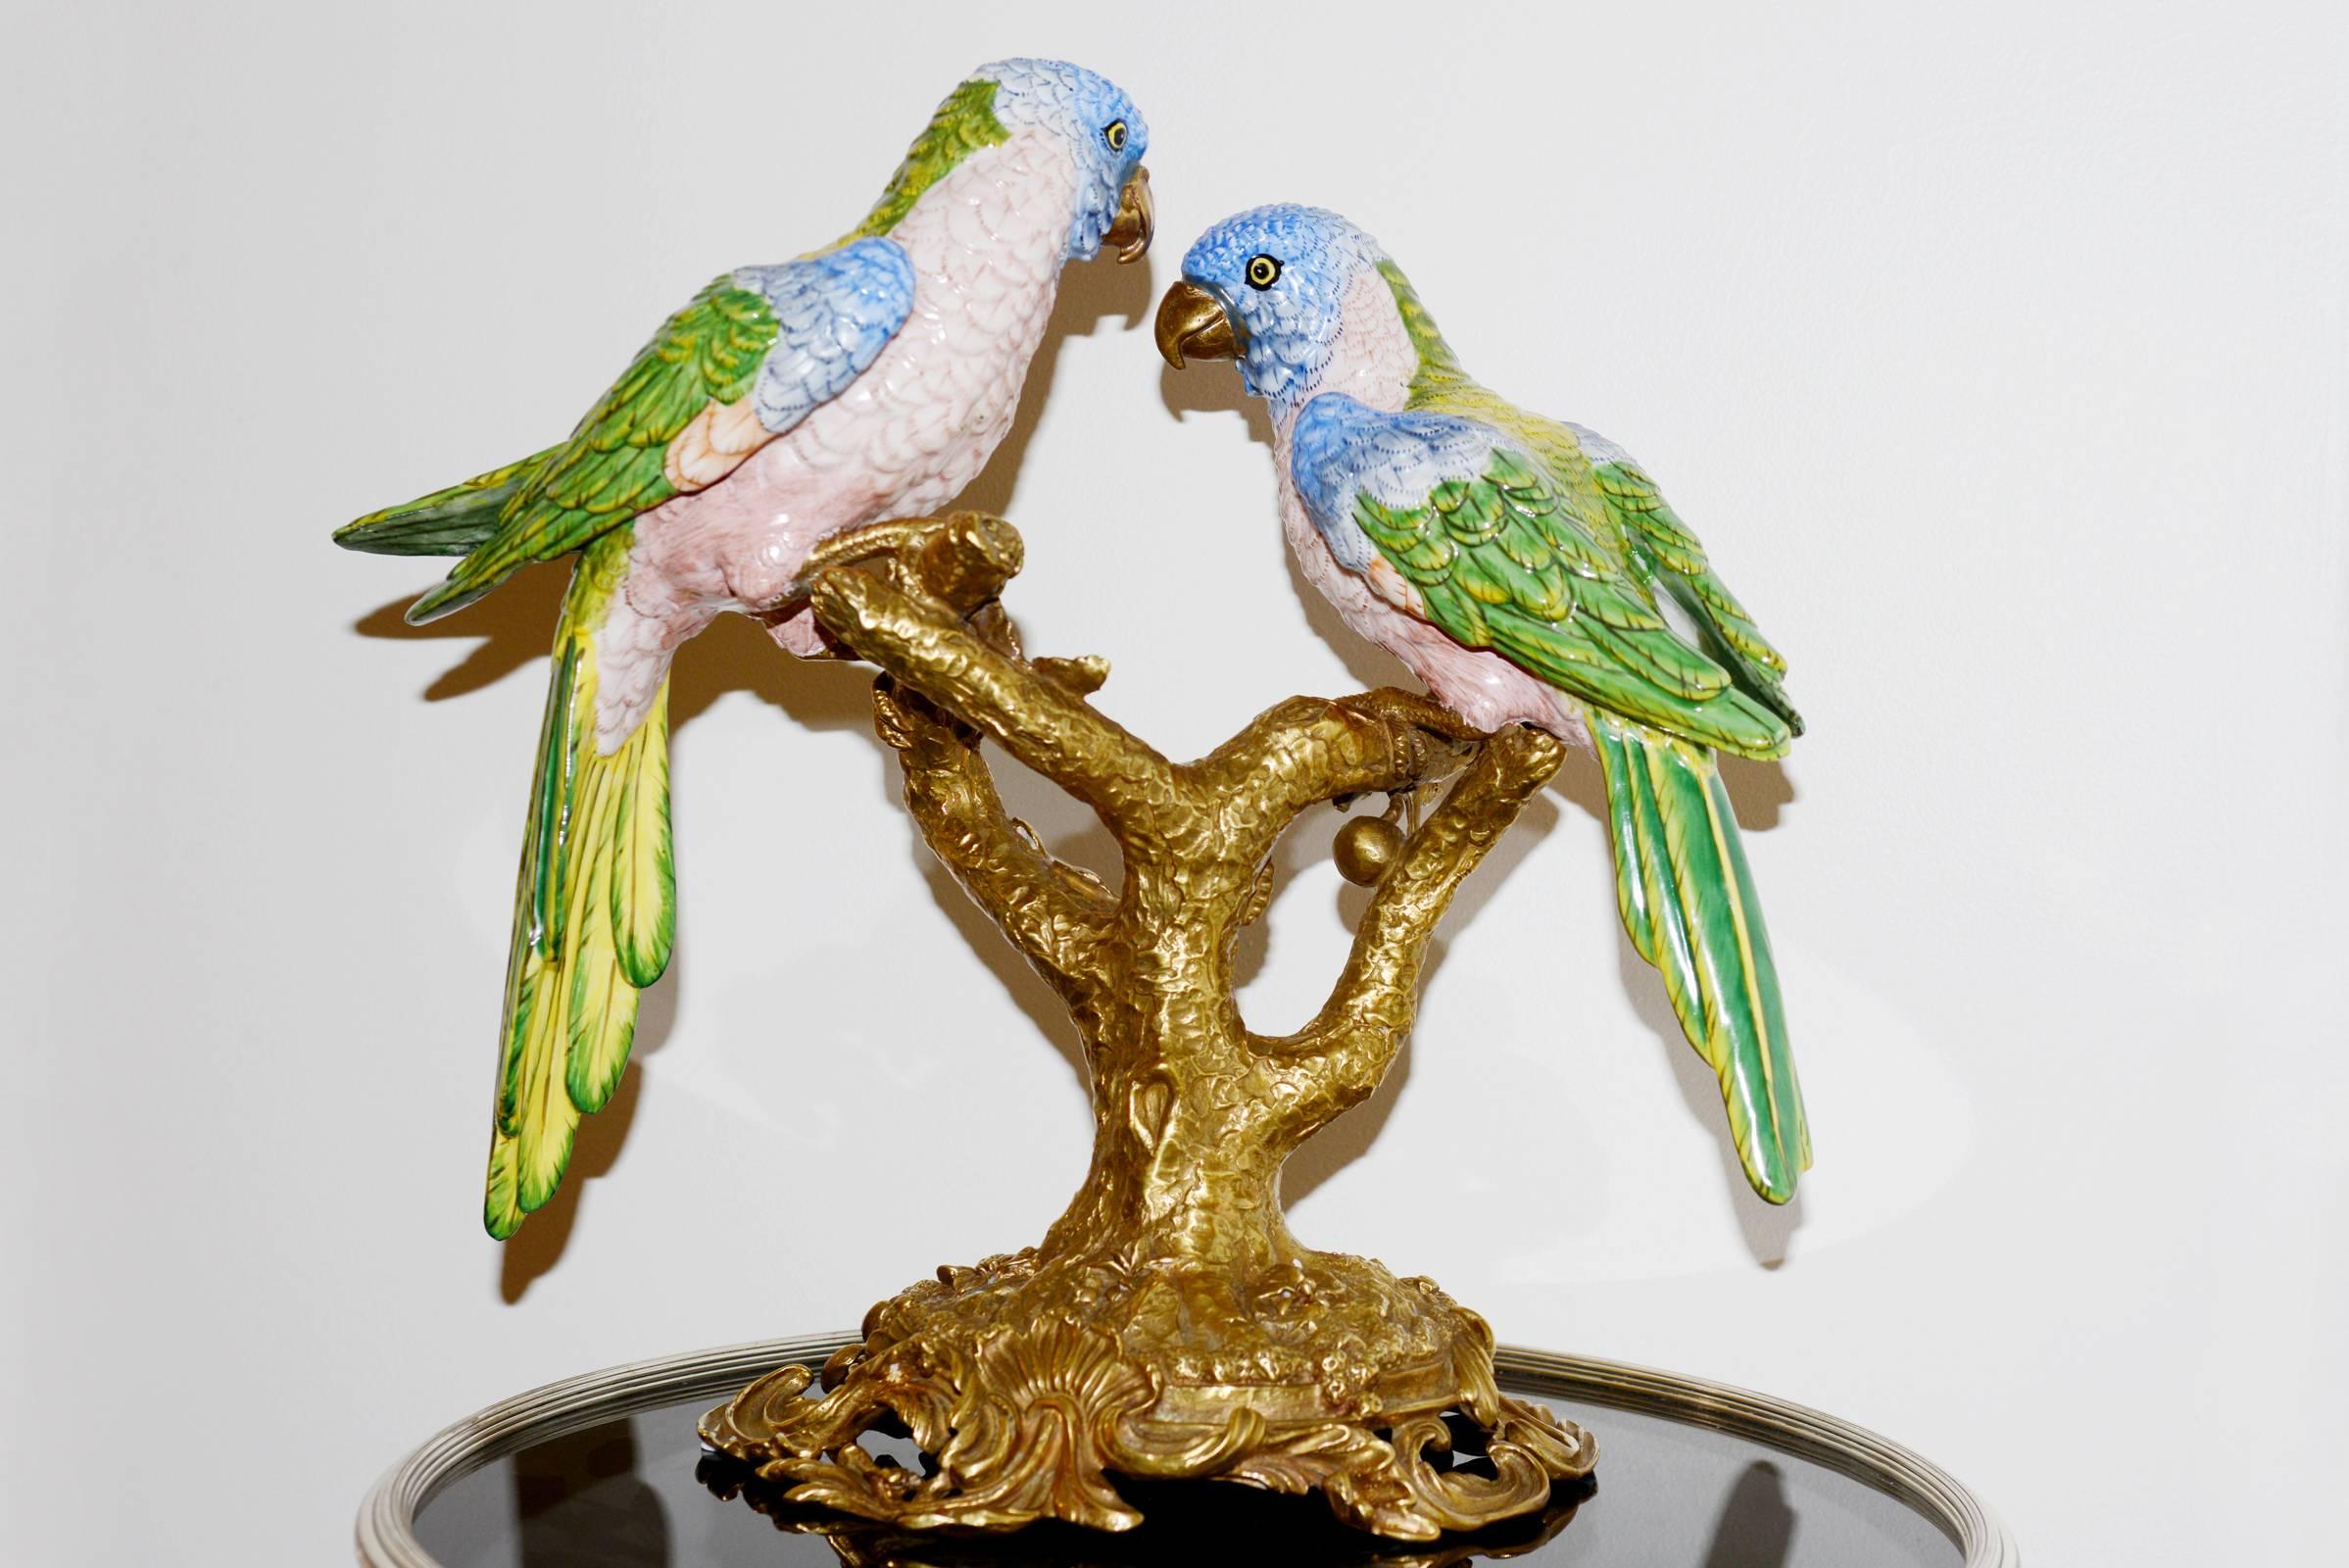 Sculpture parrot couple made in solid porcelain, 
hand-painted finish, on solid bronze and 
porcelain base.
